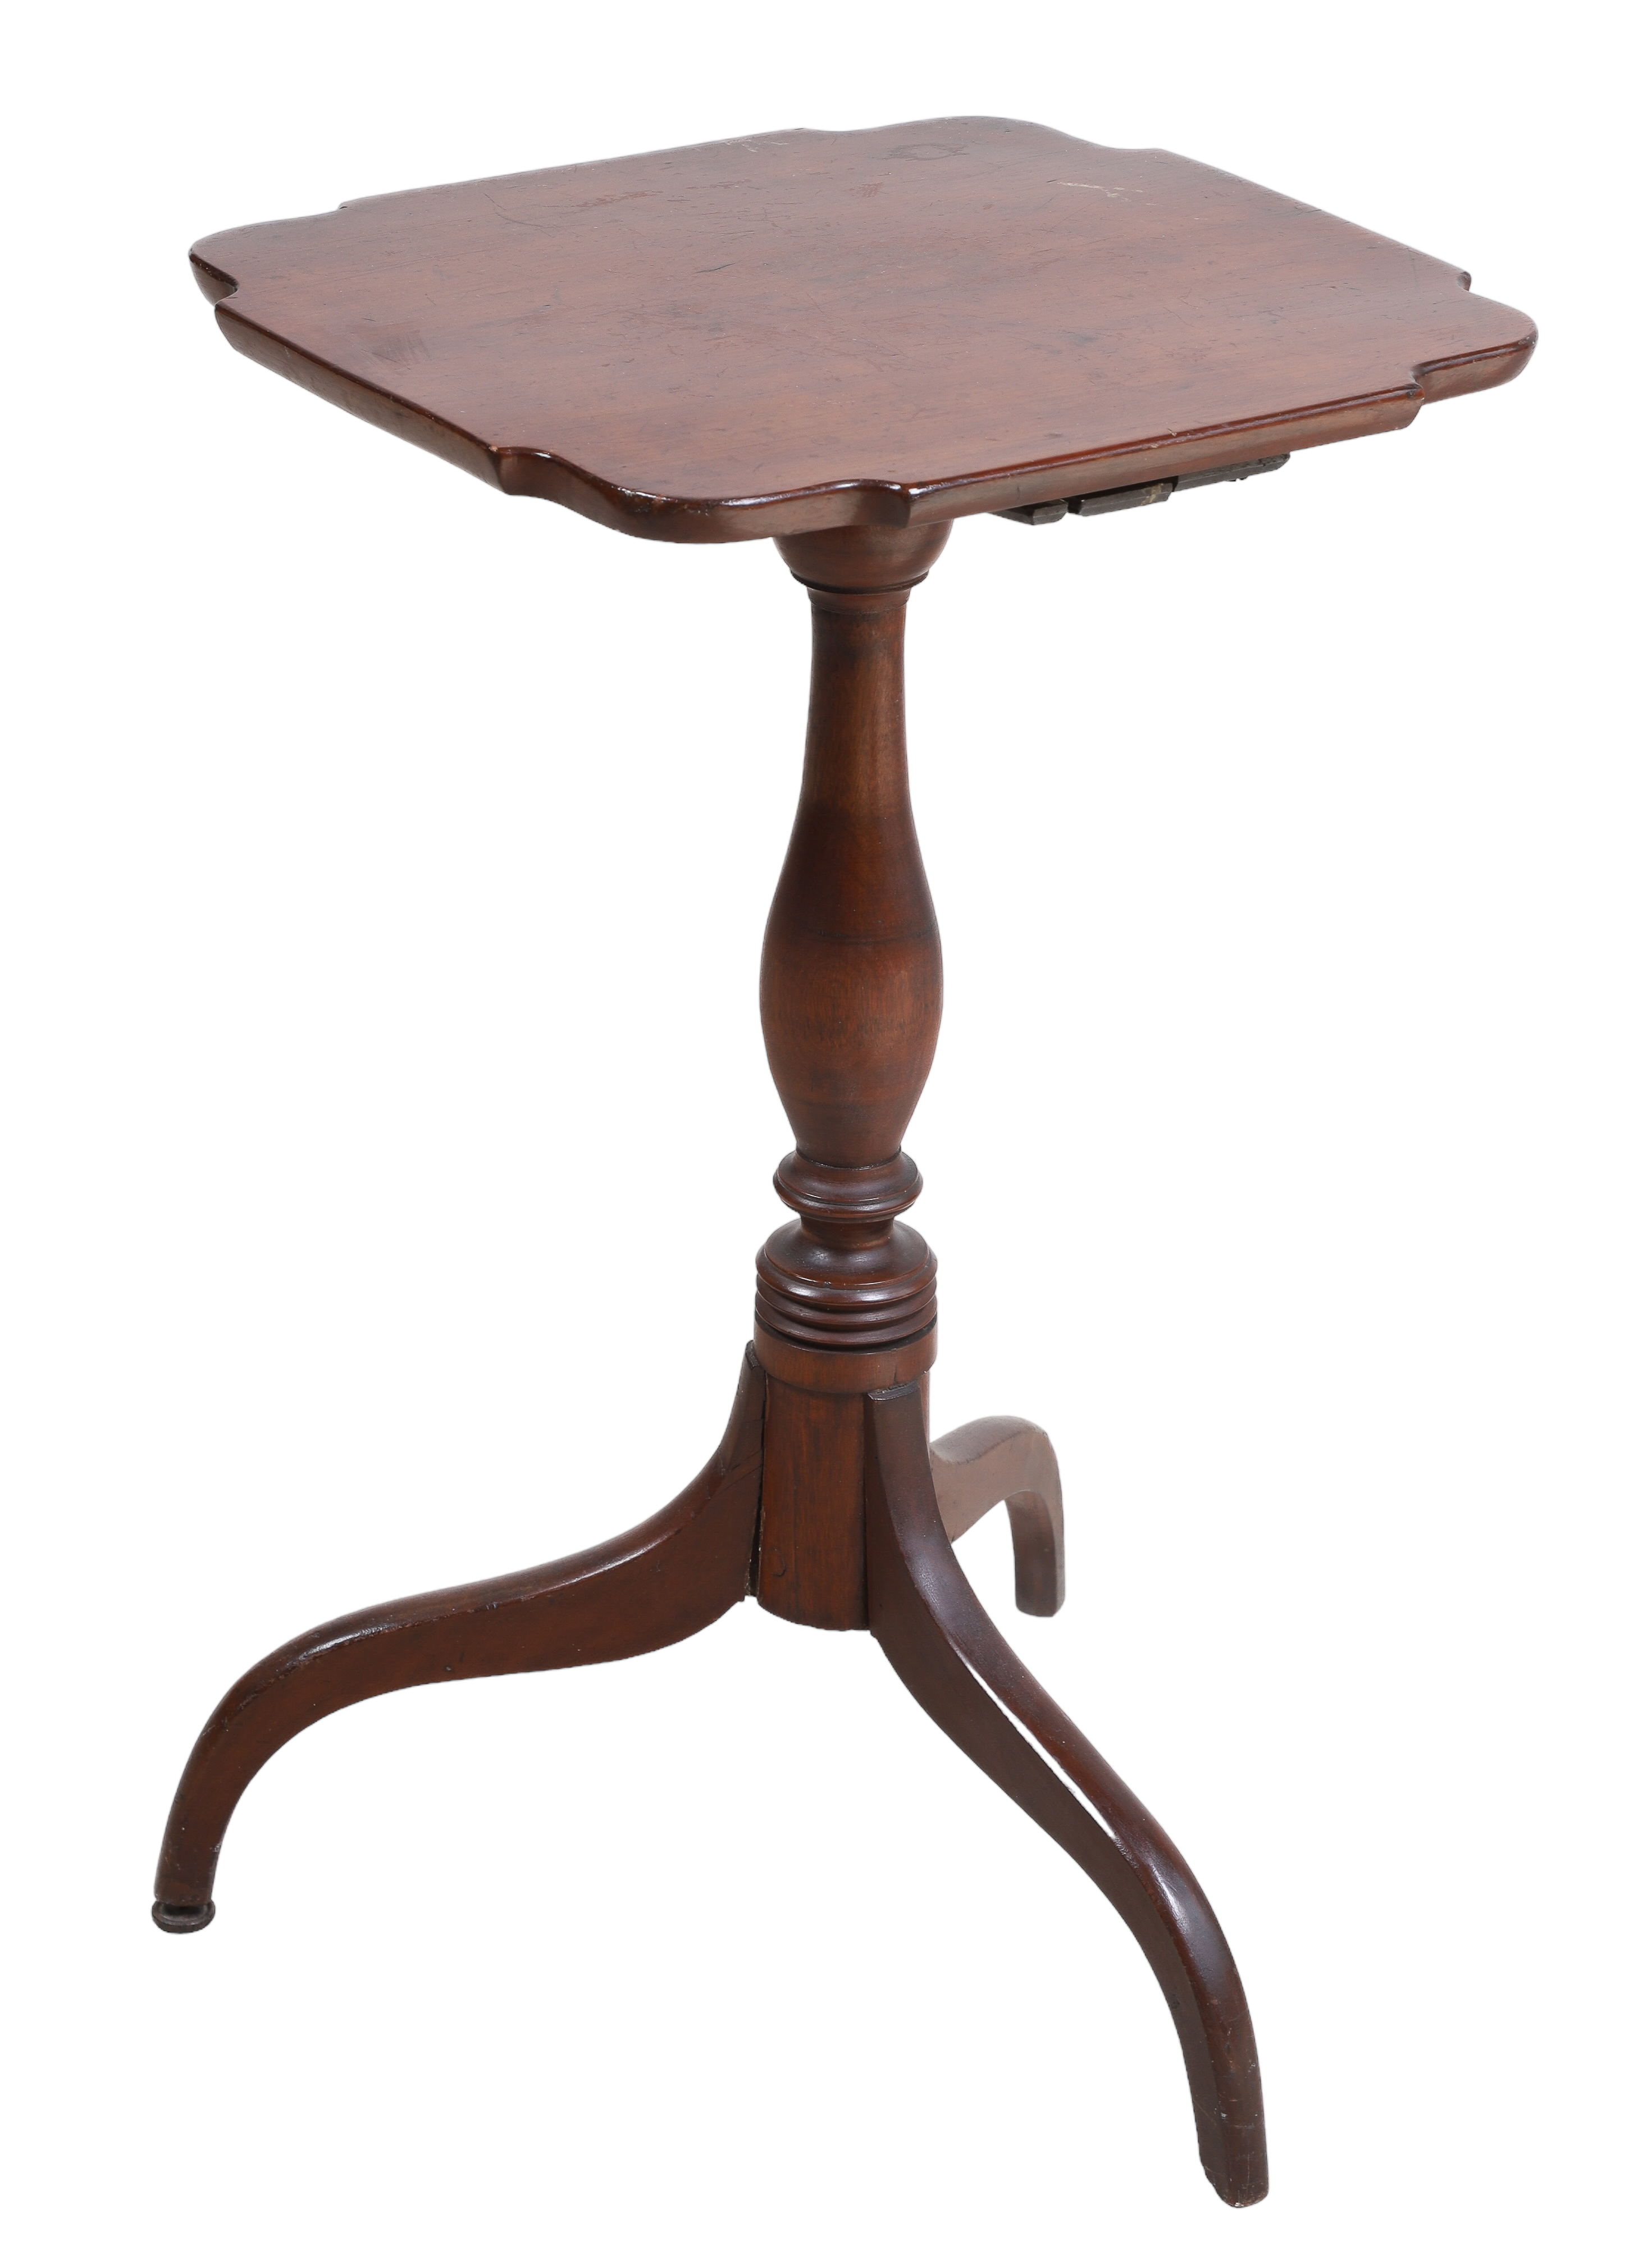 Federal style cherry candle stand,